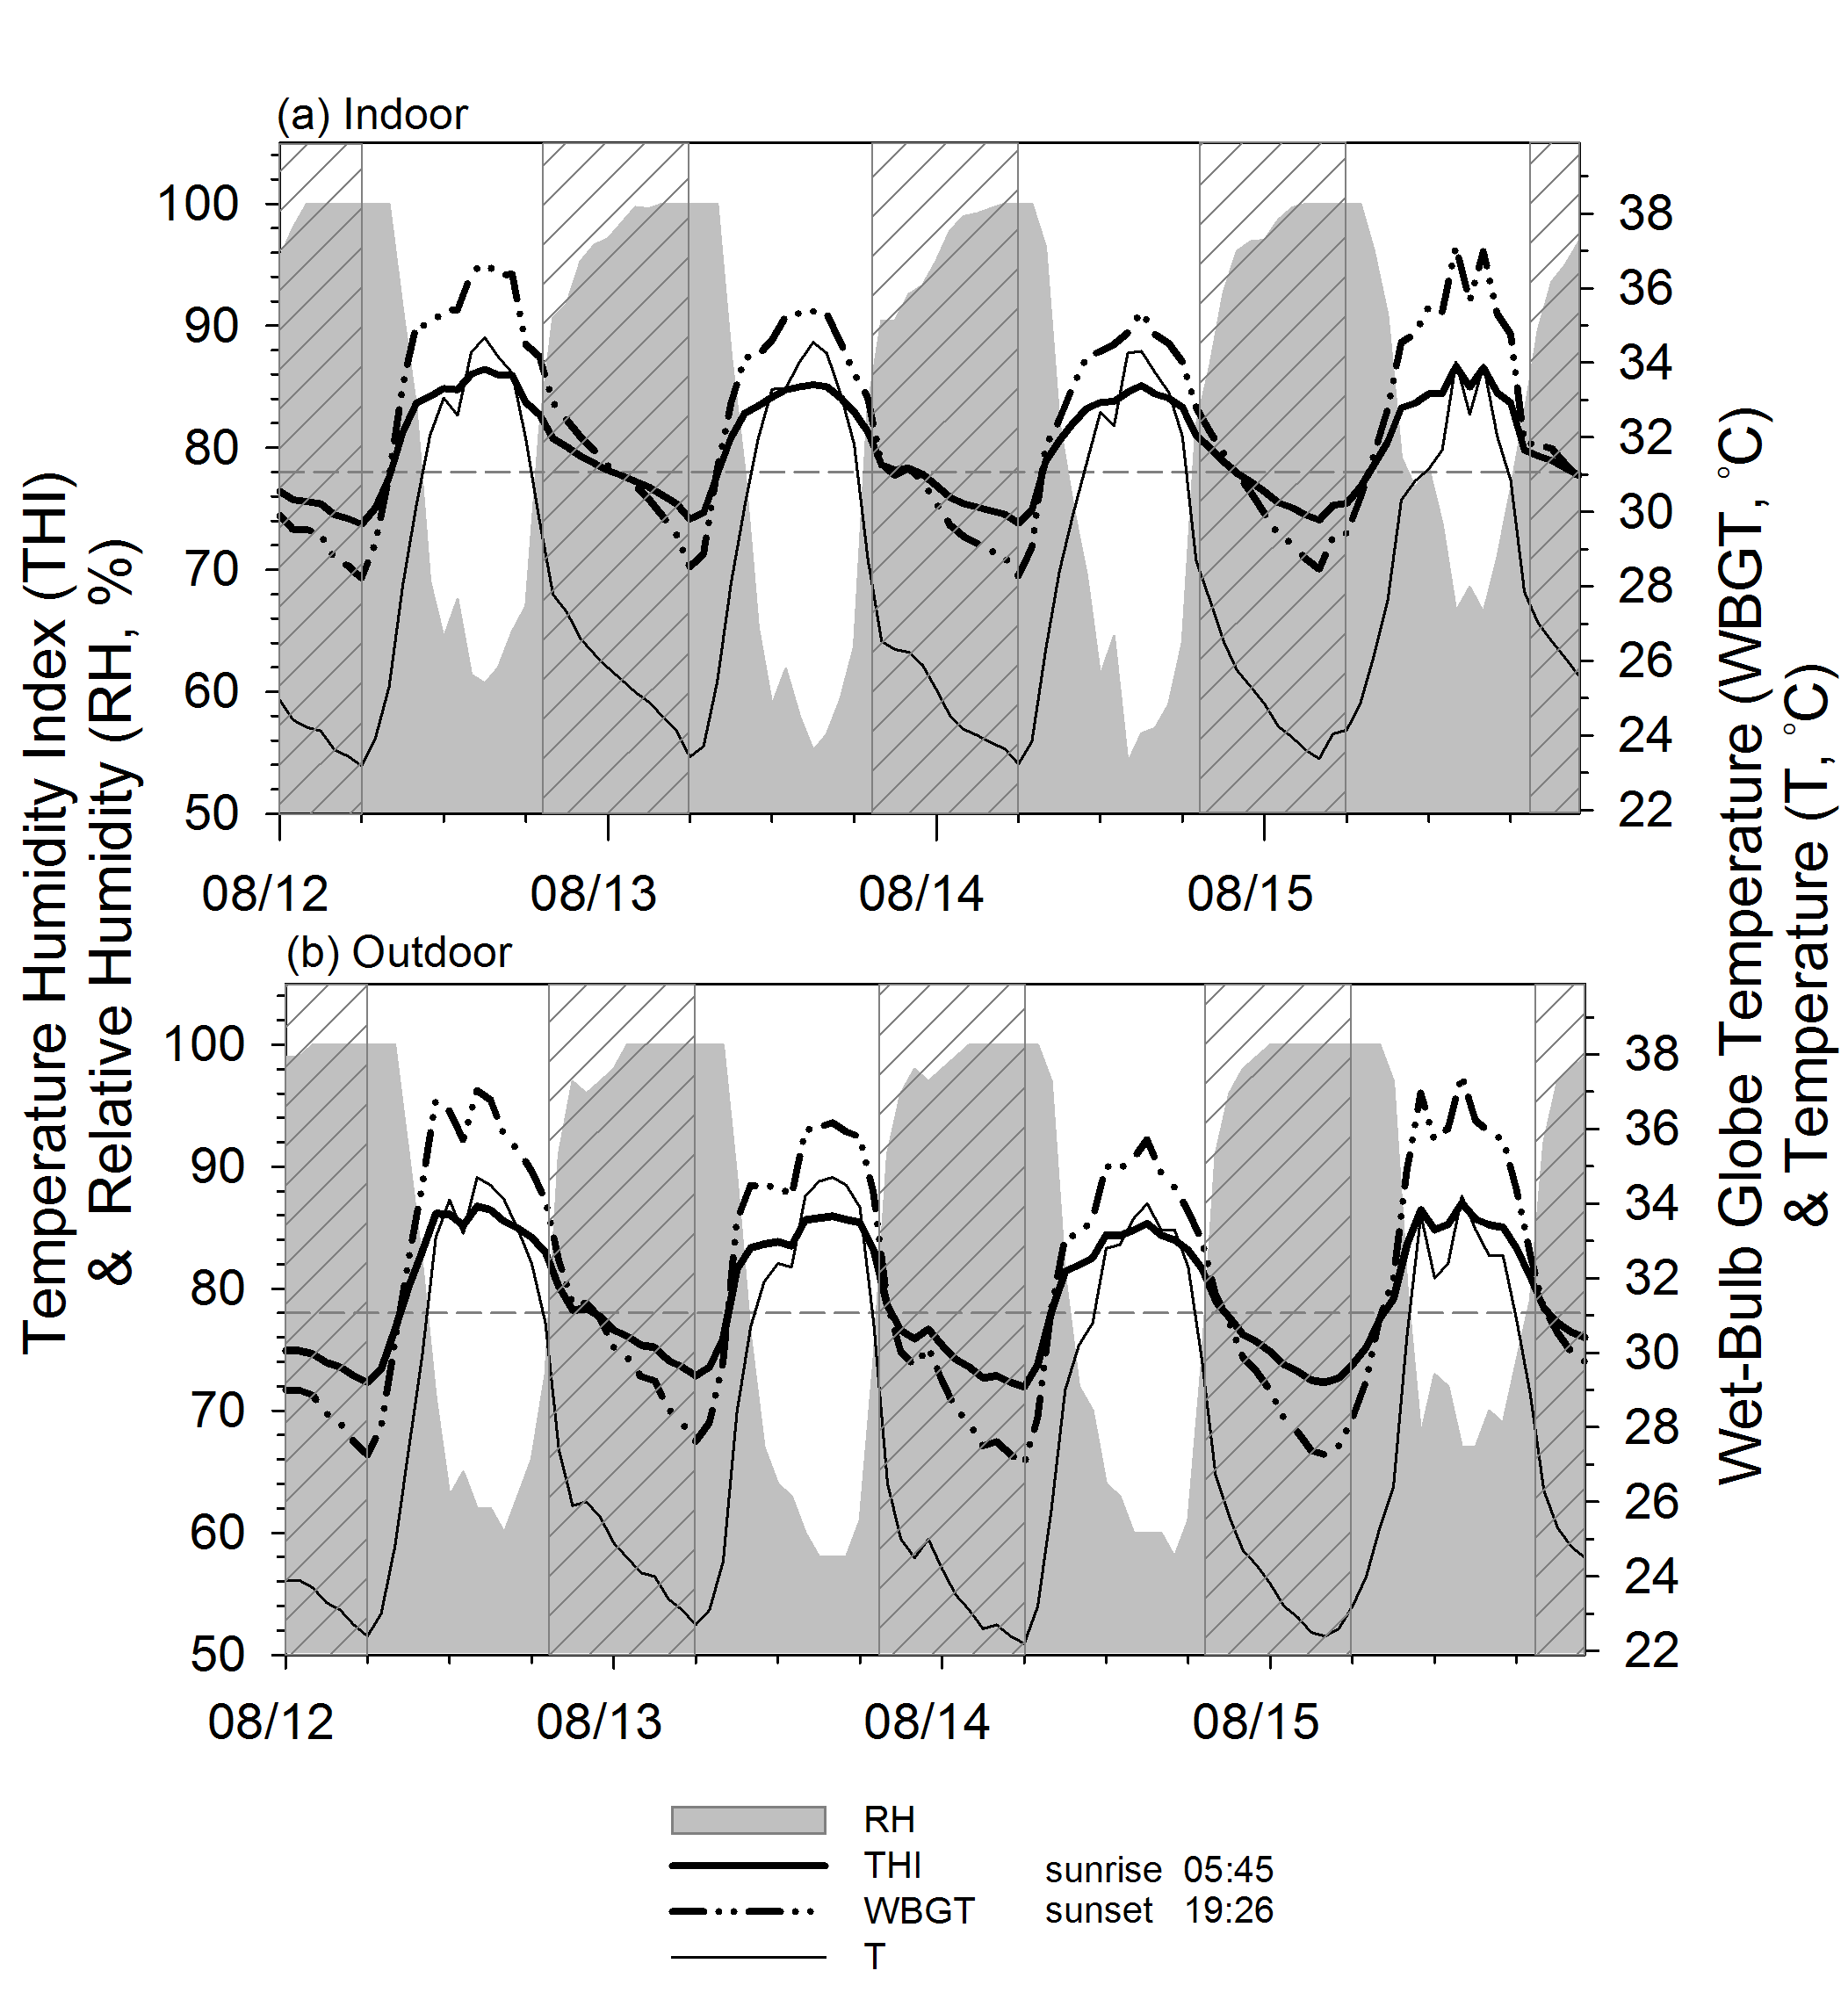 Fig. 3.4.4. Time series of variables about the thermal environment of internal and external cattle sheds. The dashed lines represent the threshold for the THI (=78) and WBGT